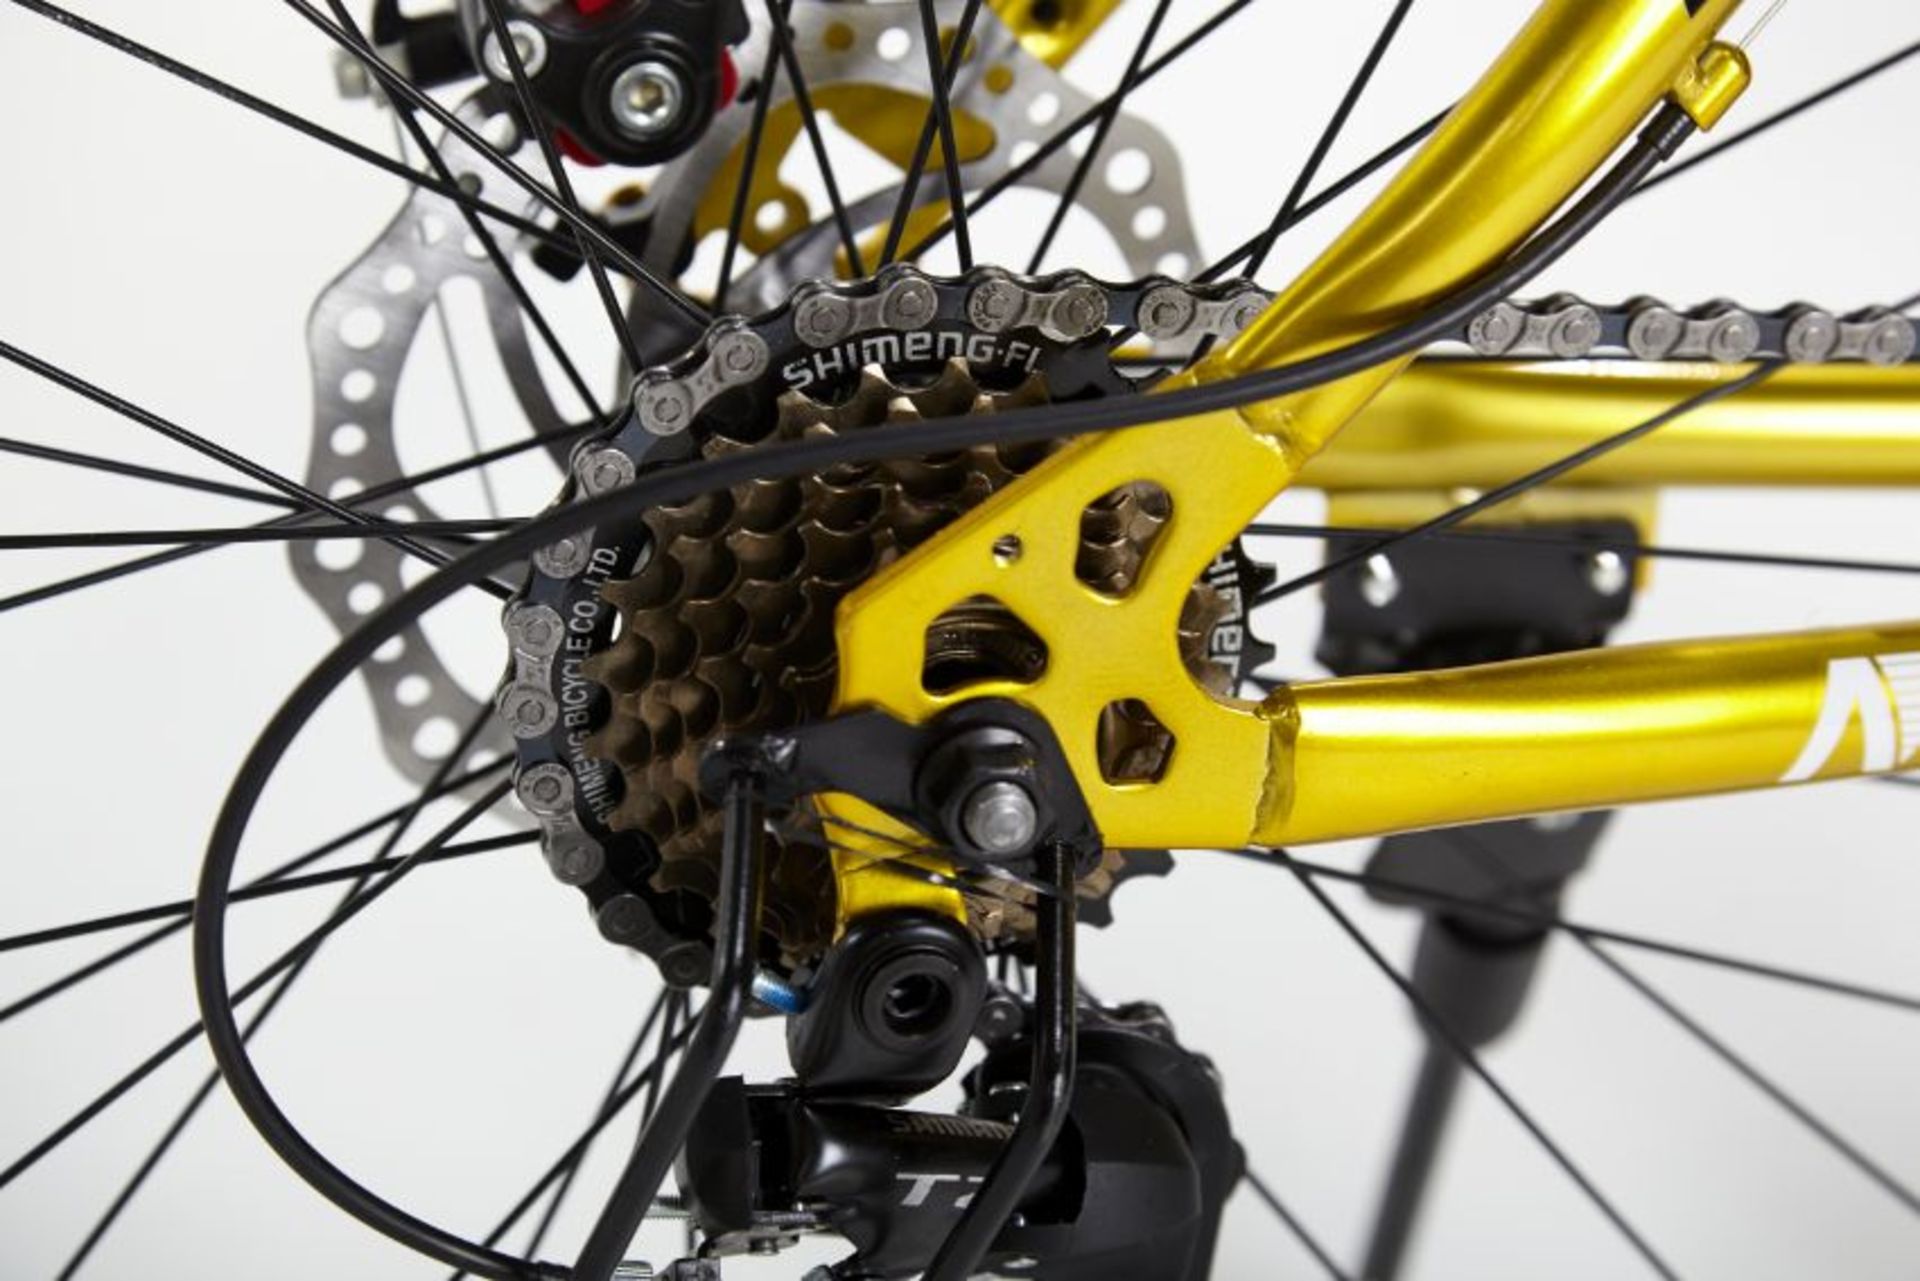 BRAND NEW NEW SPEED 21 GEARS STUNNING SUSPENSION GOLD COLOURED MOUNTAIN BIKE - Image 8 of 11